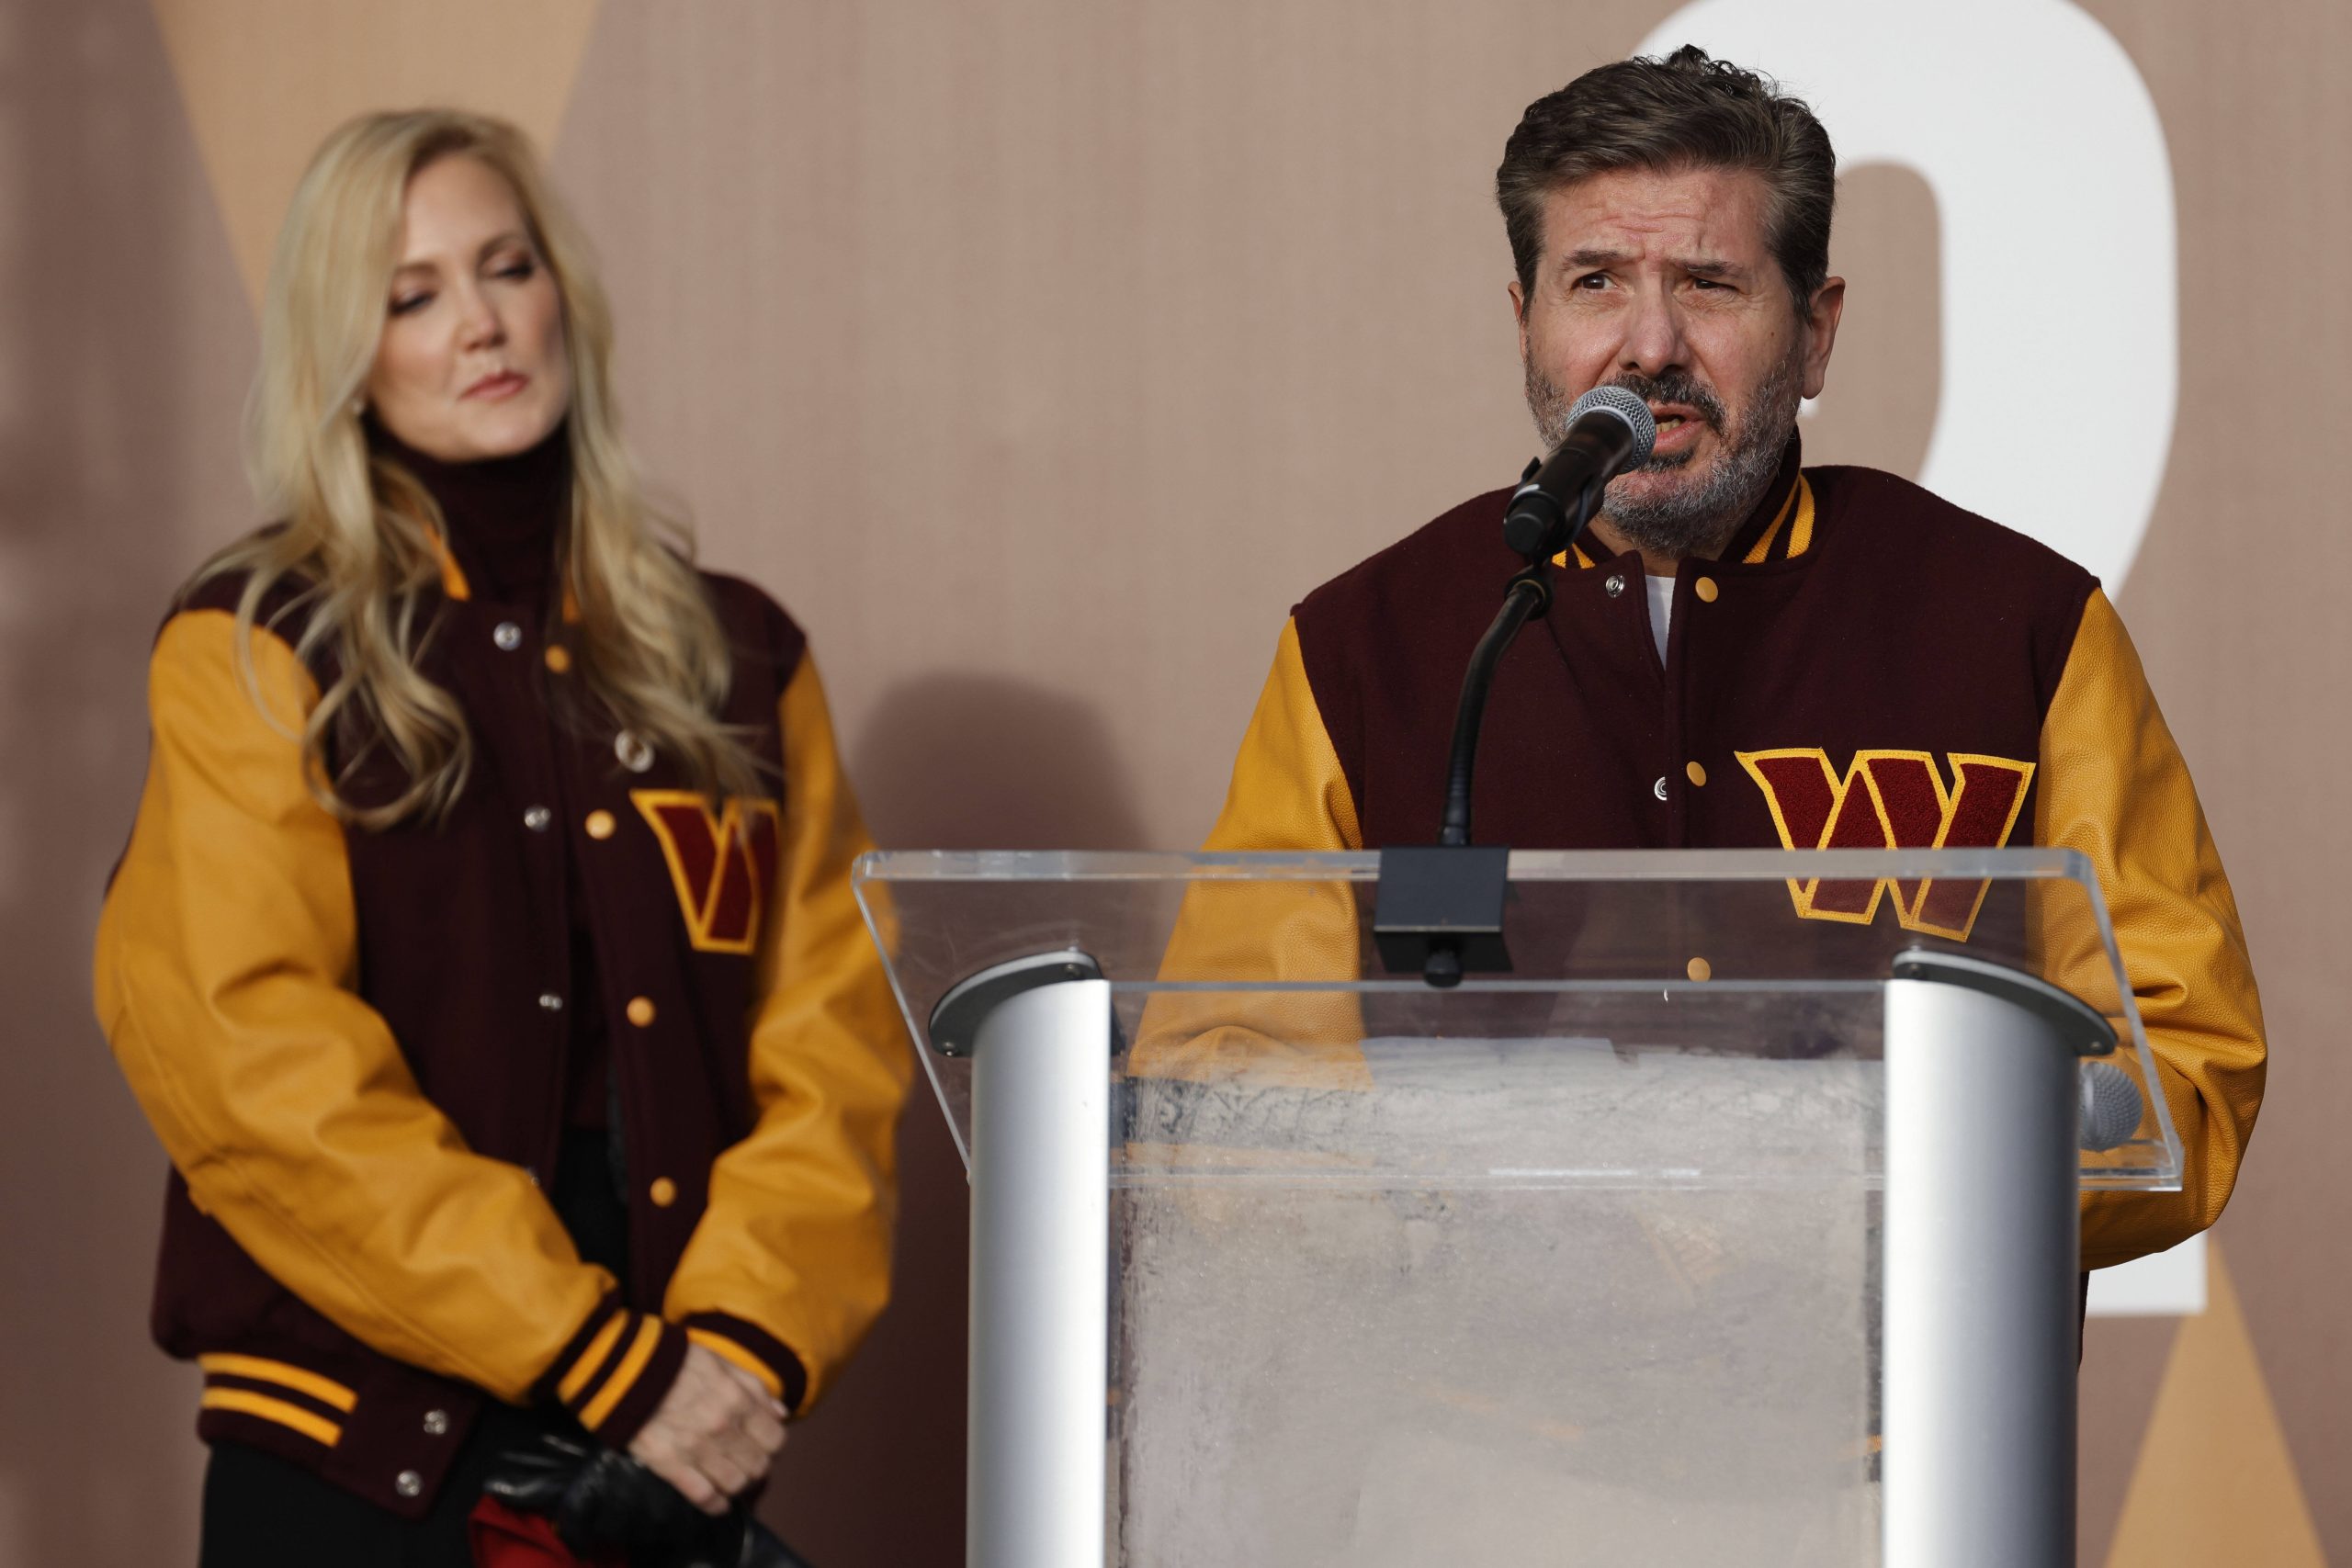 NFL, American Football Dan Snyder, USA Washington Football Team press conference, PK, Pressekonferenz Feb 2, 2022 Landover, MD, USA Washington Commanders co-owner Dan Snyder speaks as co-owner Tanya Snyder L listens during a press conference revealing the Commanders as the new name for the formerly named Washington Football Team at FedEx Field. Mandatory Credit: Geoff Burke-USA TODAY Sports, 02.02.2022 08:36:19, 17604883, FedEx Field, NFL, Dan Snyder, Washington Football Team PUBLICATIONxINxGERxSUIxAUTxONLY Copyright: xGeoffxBurkex 17604883